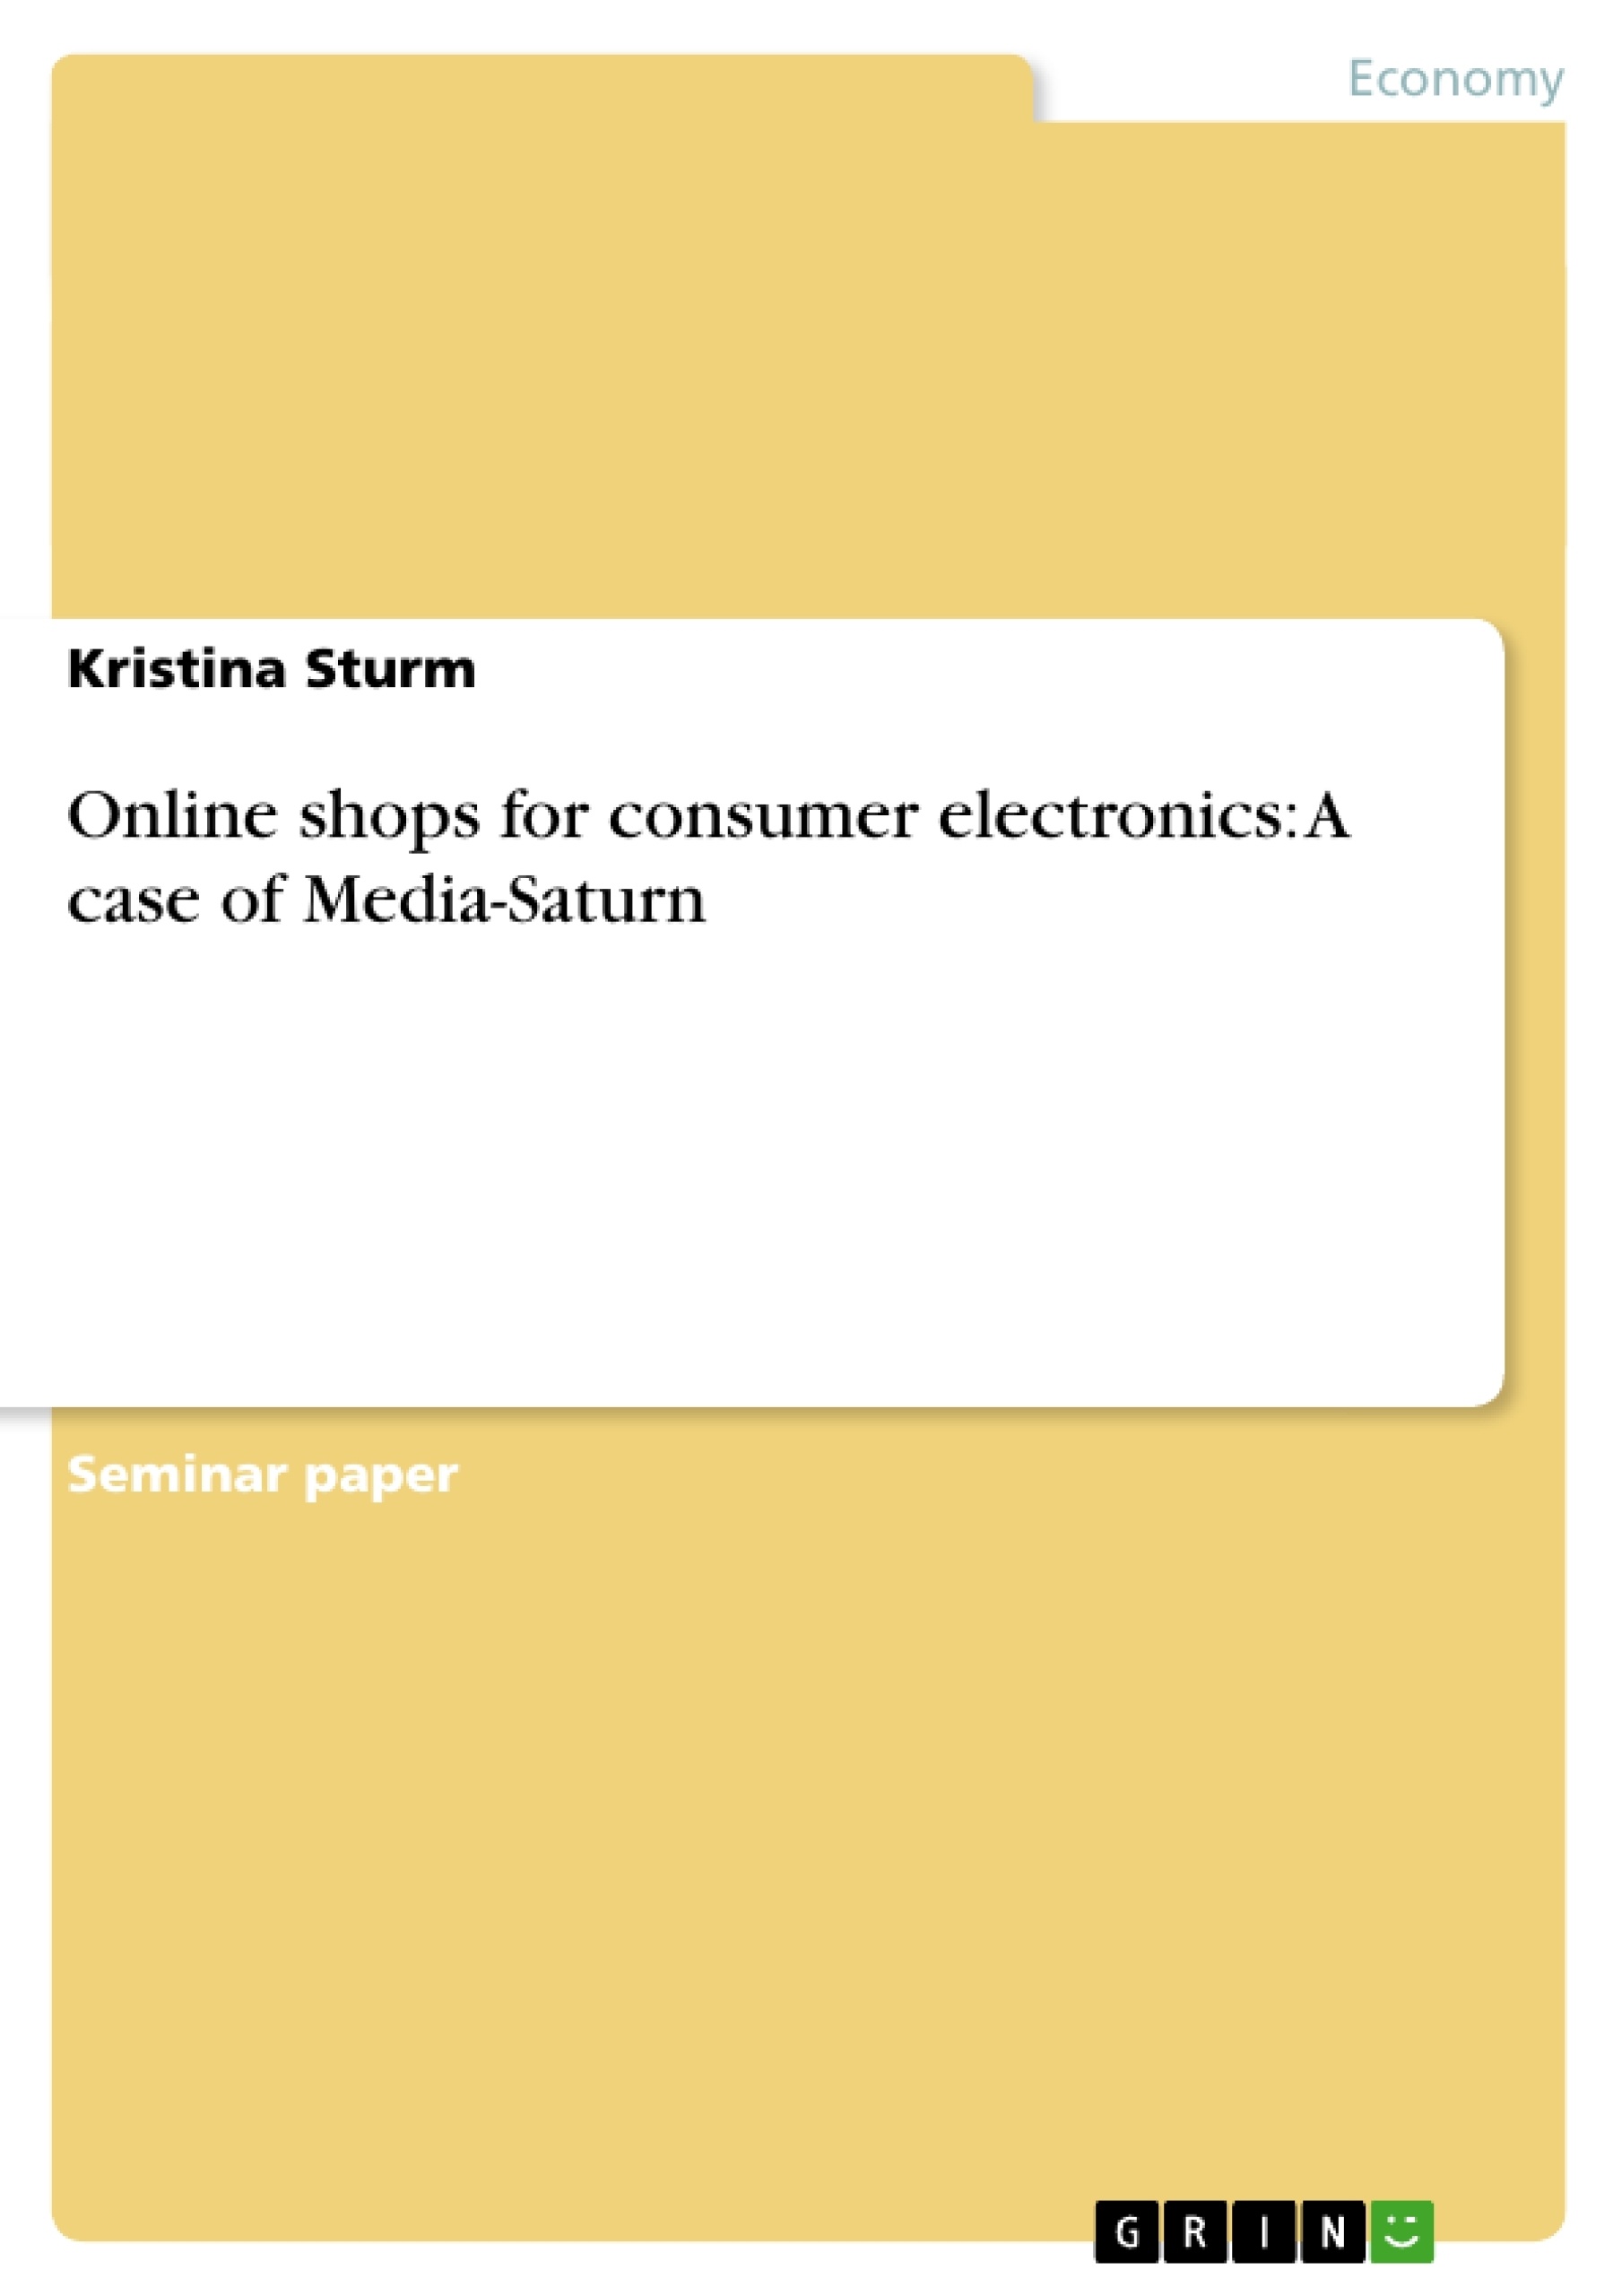 Title: Online shops for consumer electronics: A case of Media-Saturn